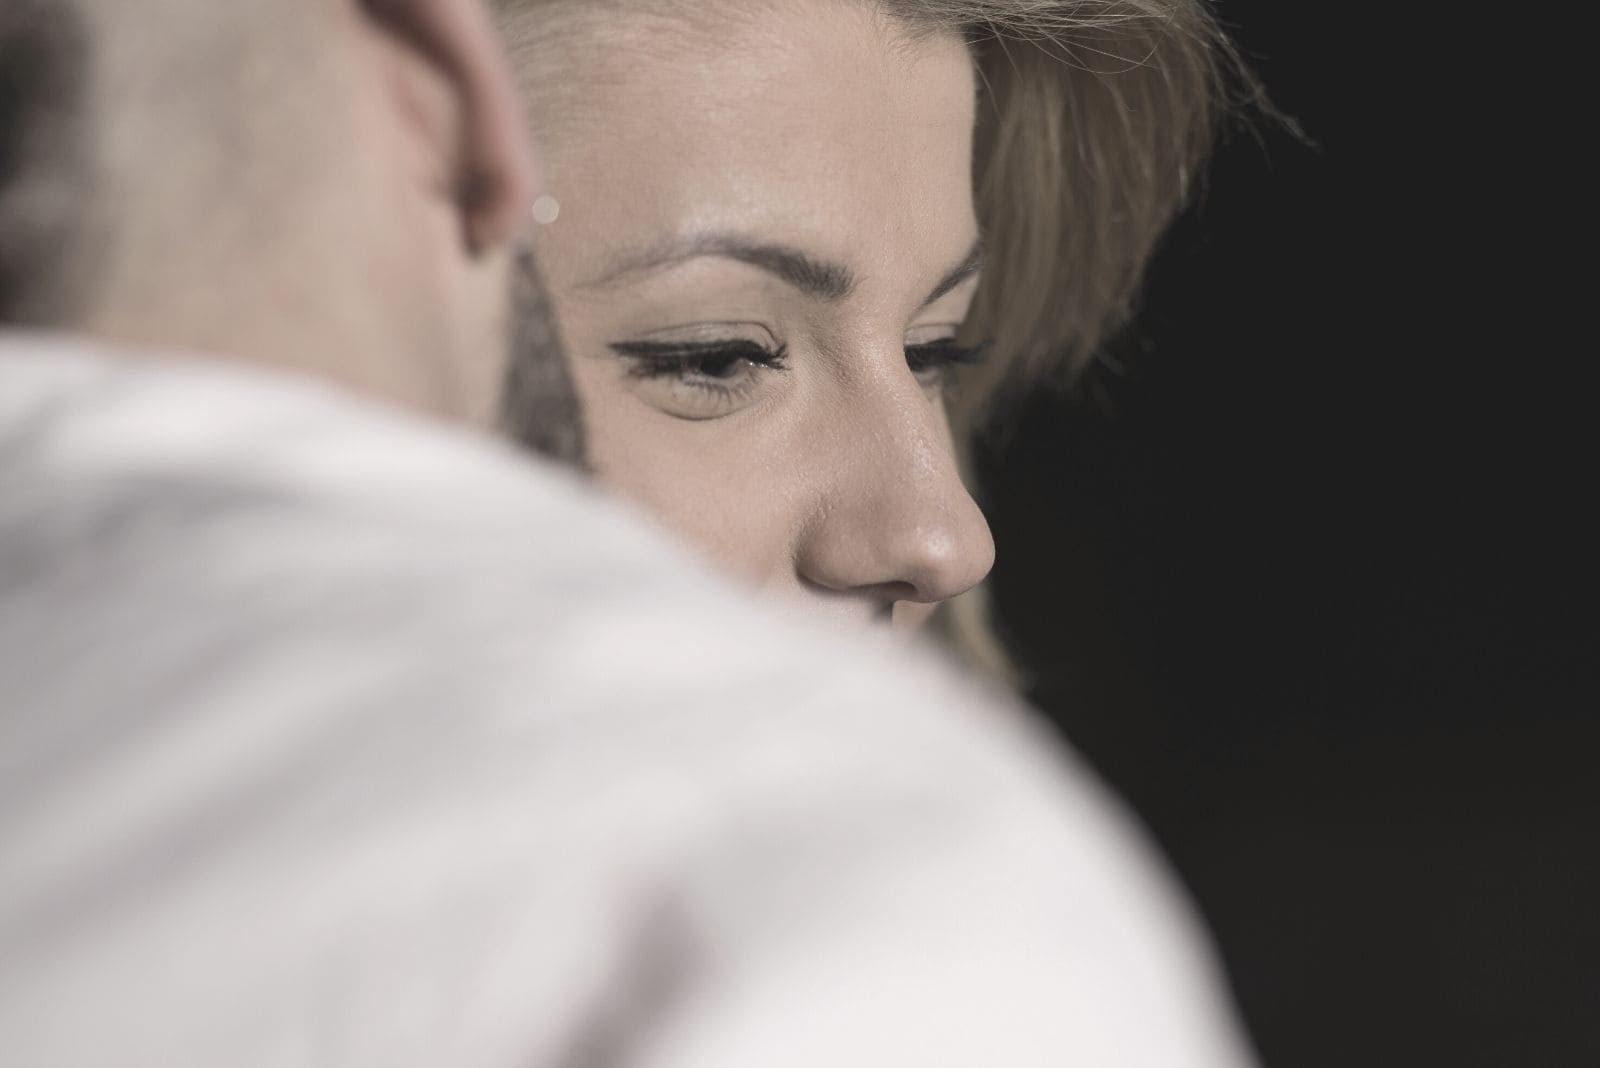 man whispering something to the woman's ear in close up photo